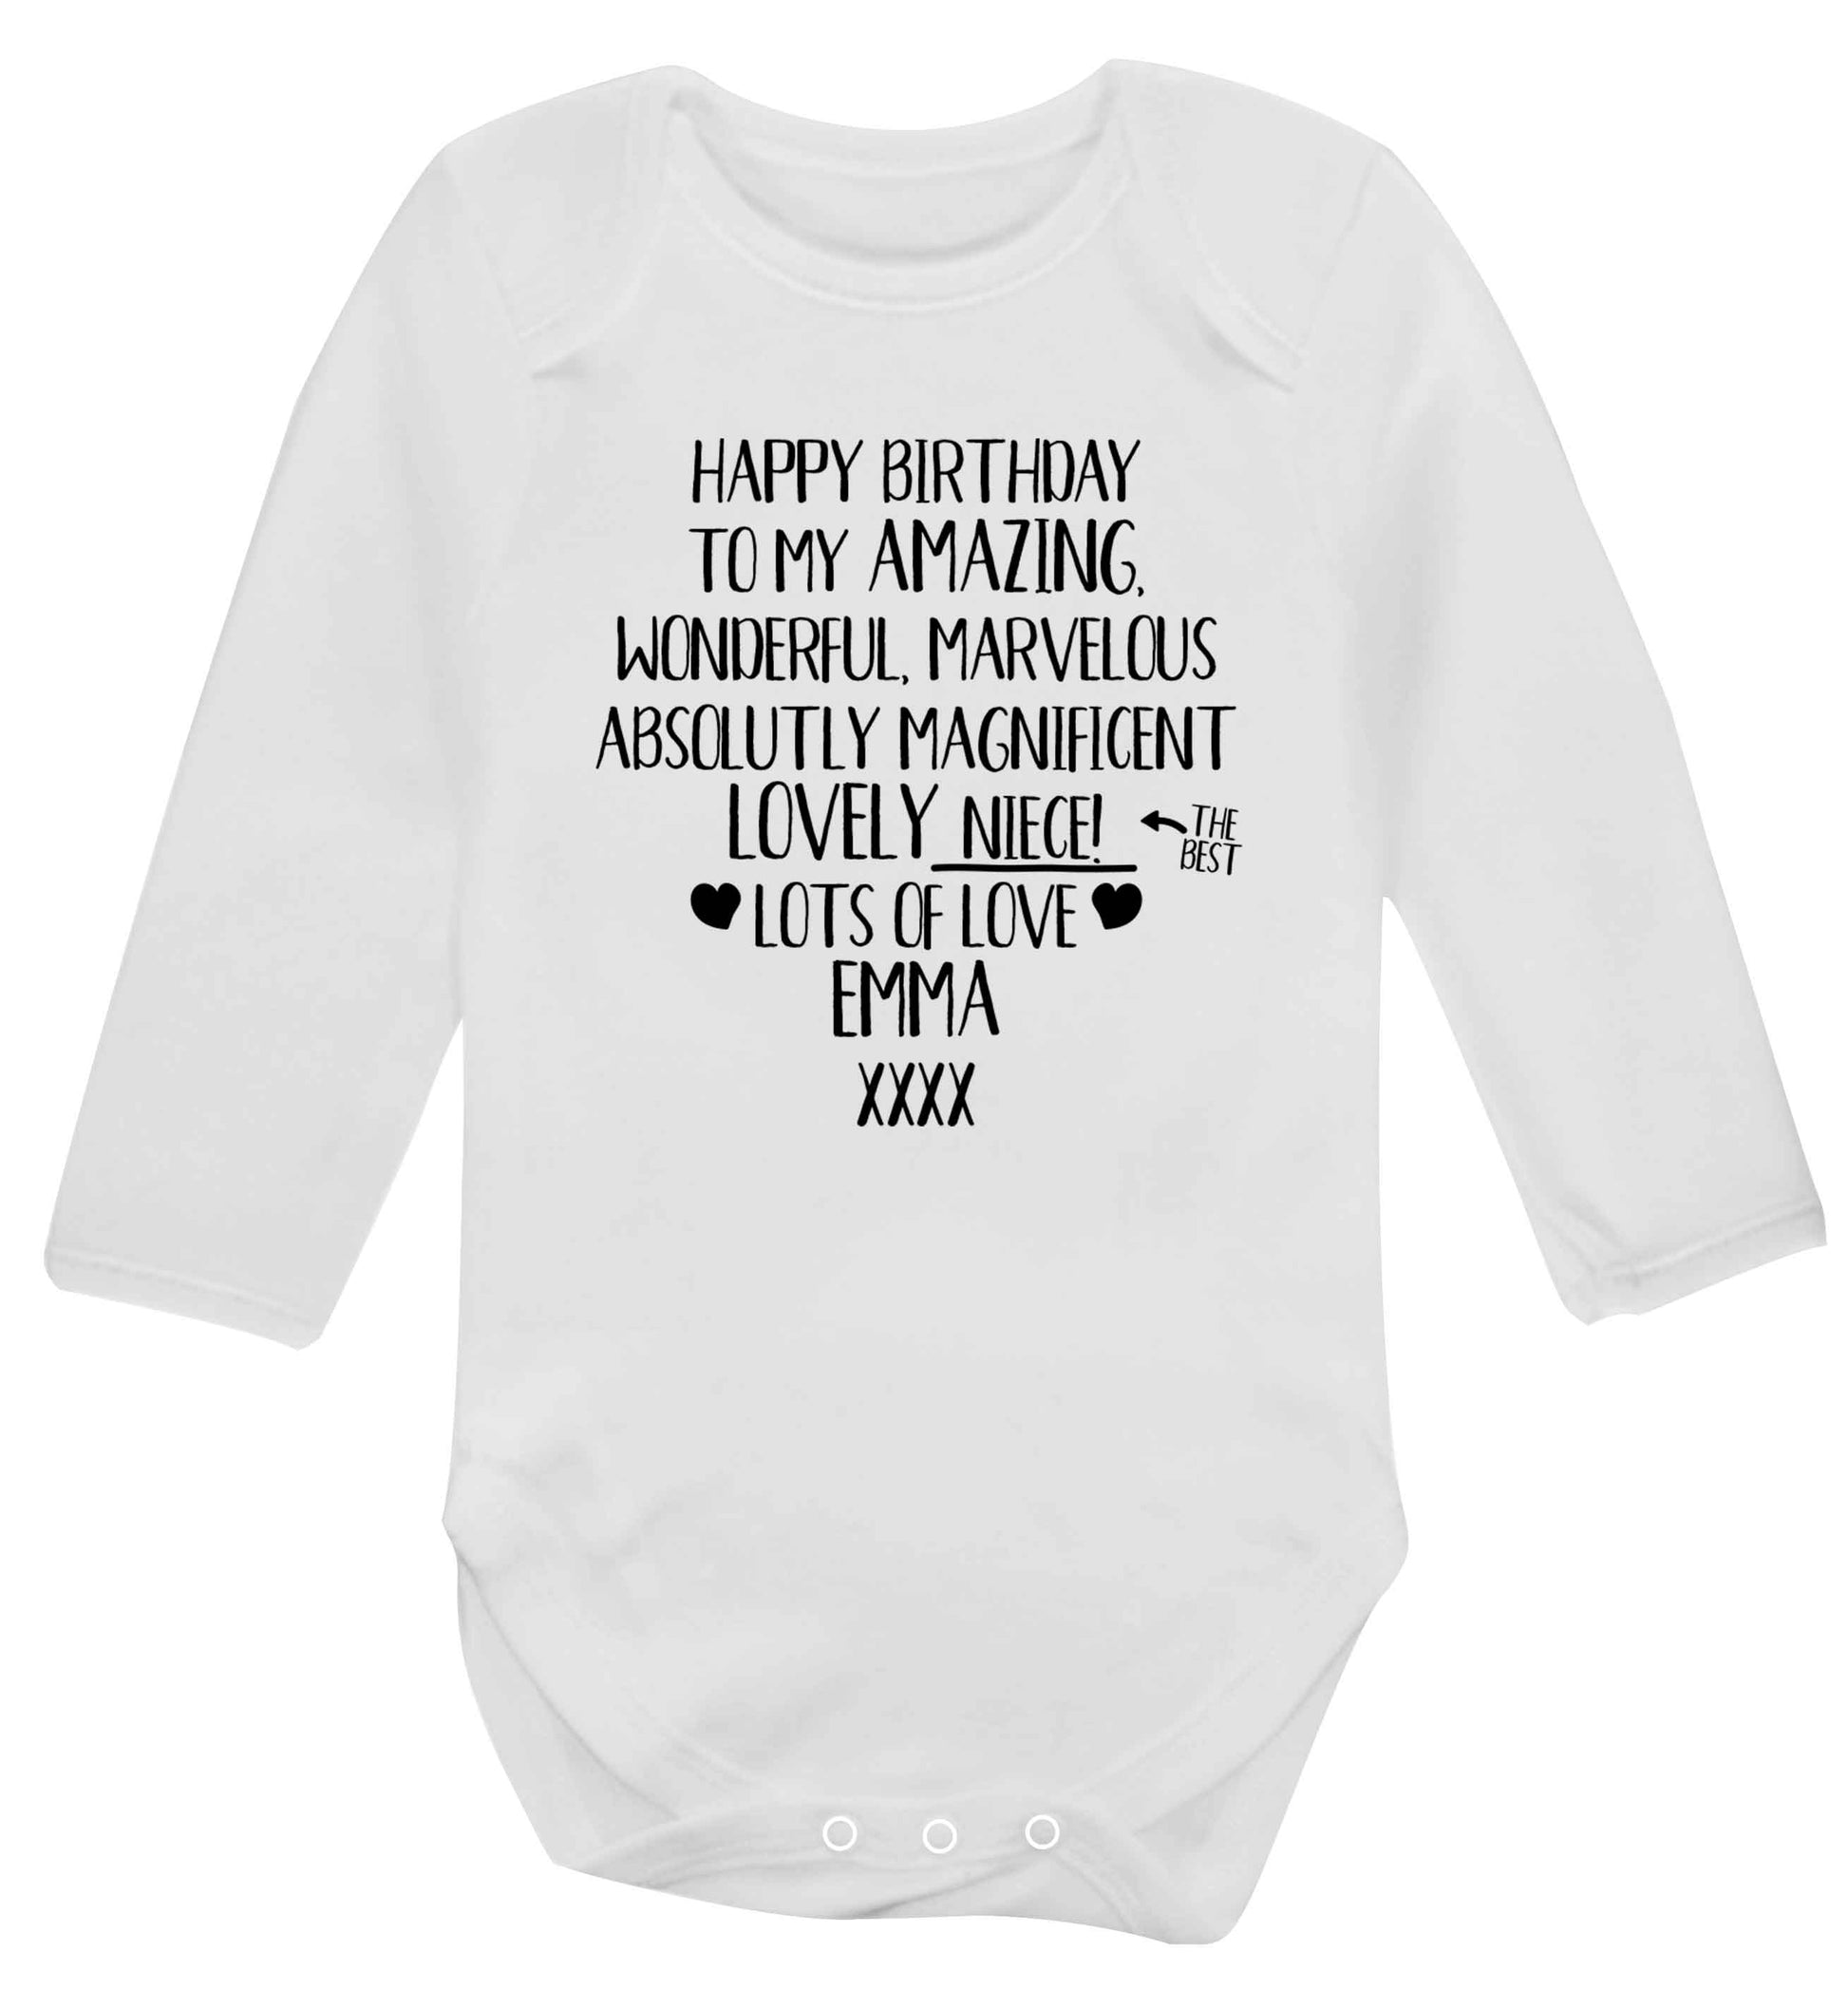 Personalised happy birthday to my amazing, wonderful, lovely niece Baby Vest long sleeved white 6-12 months